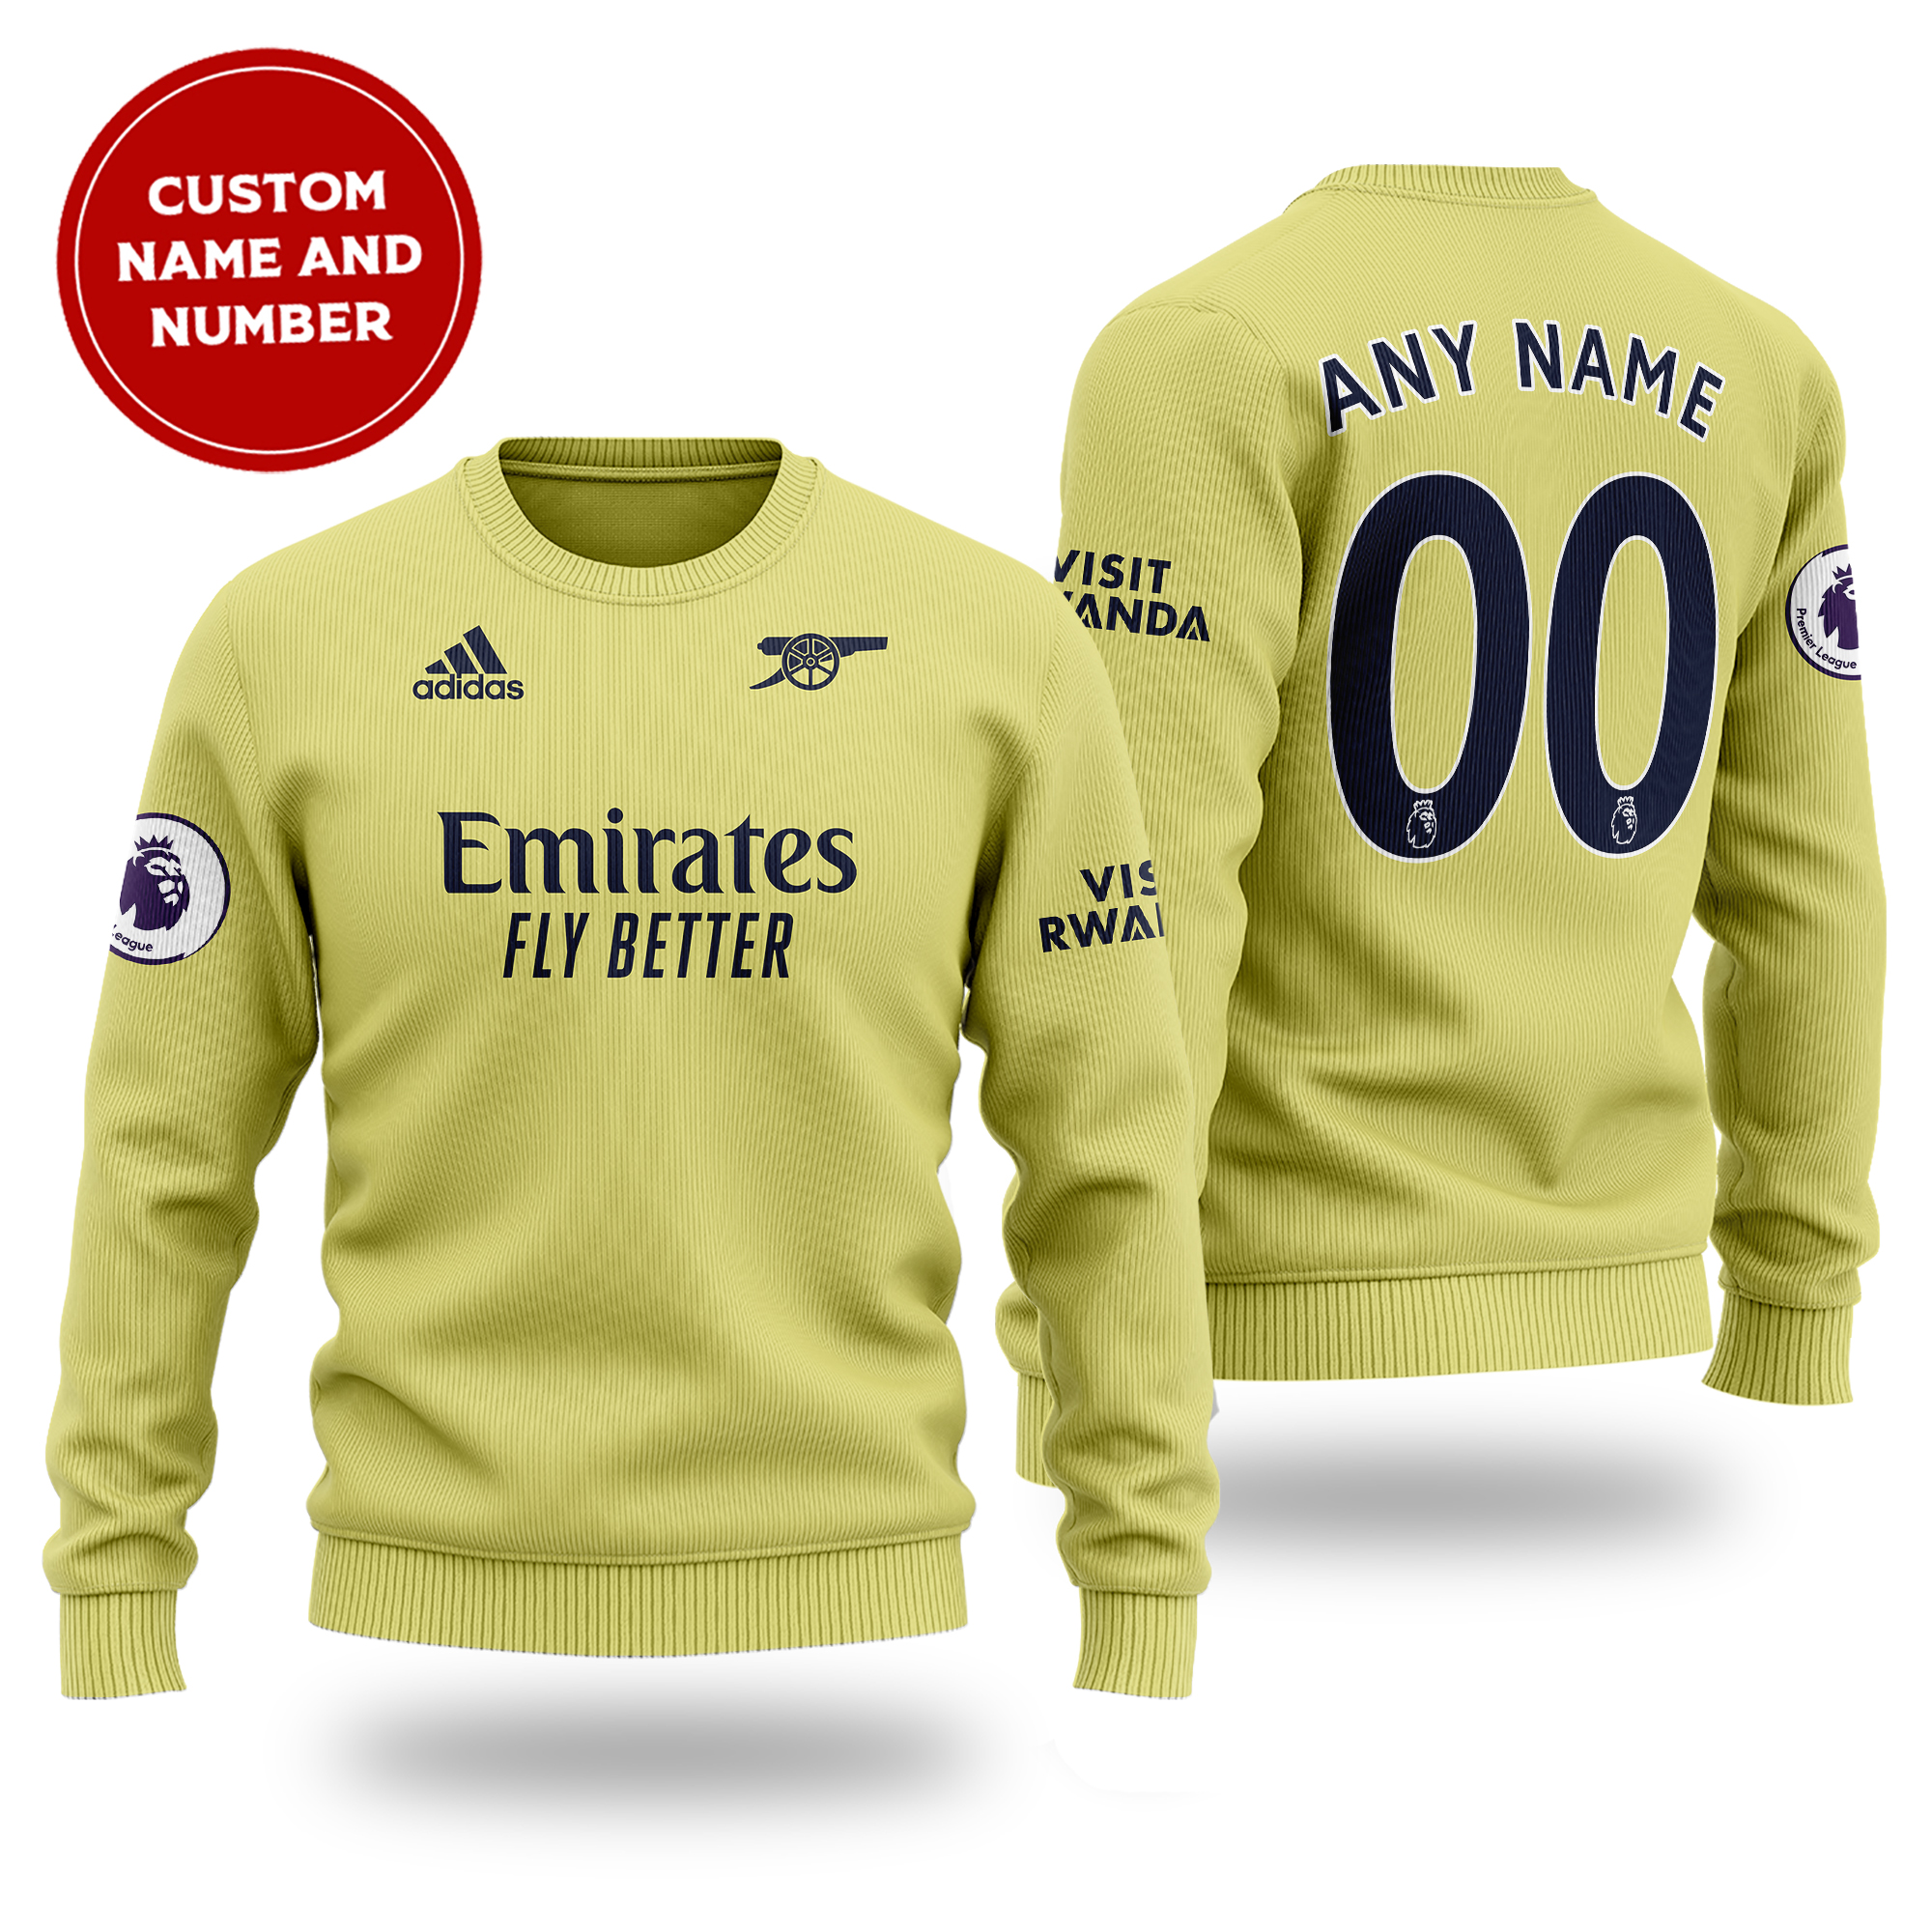 [ Amazing ] Primier League Arsenal FC away kit cutom name and number sweater – Saleoff 261121